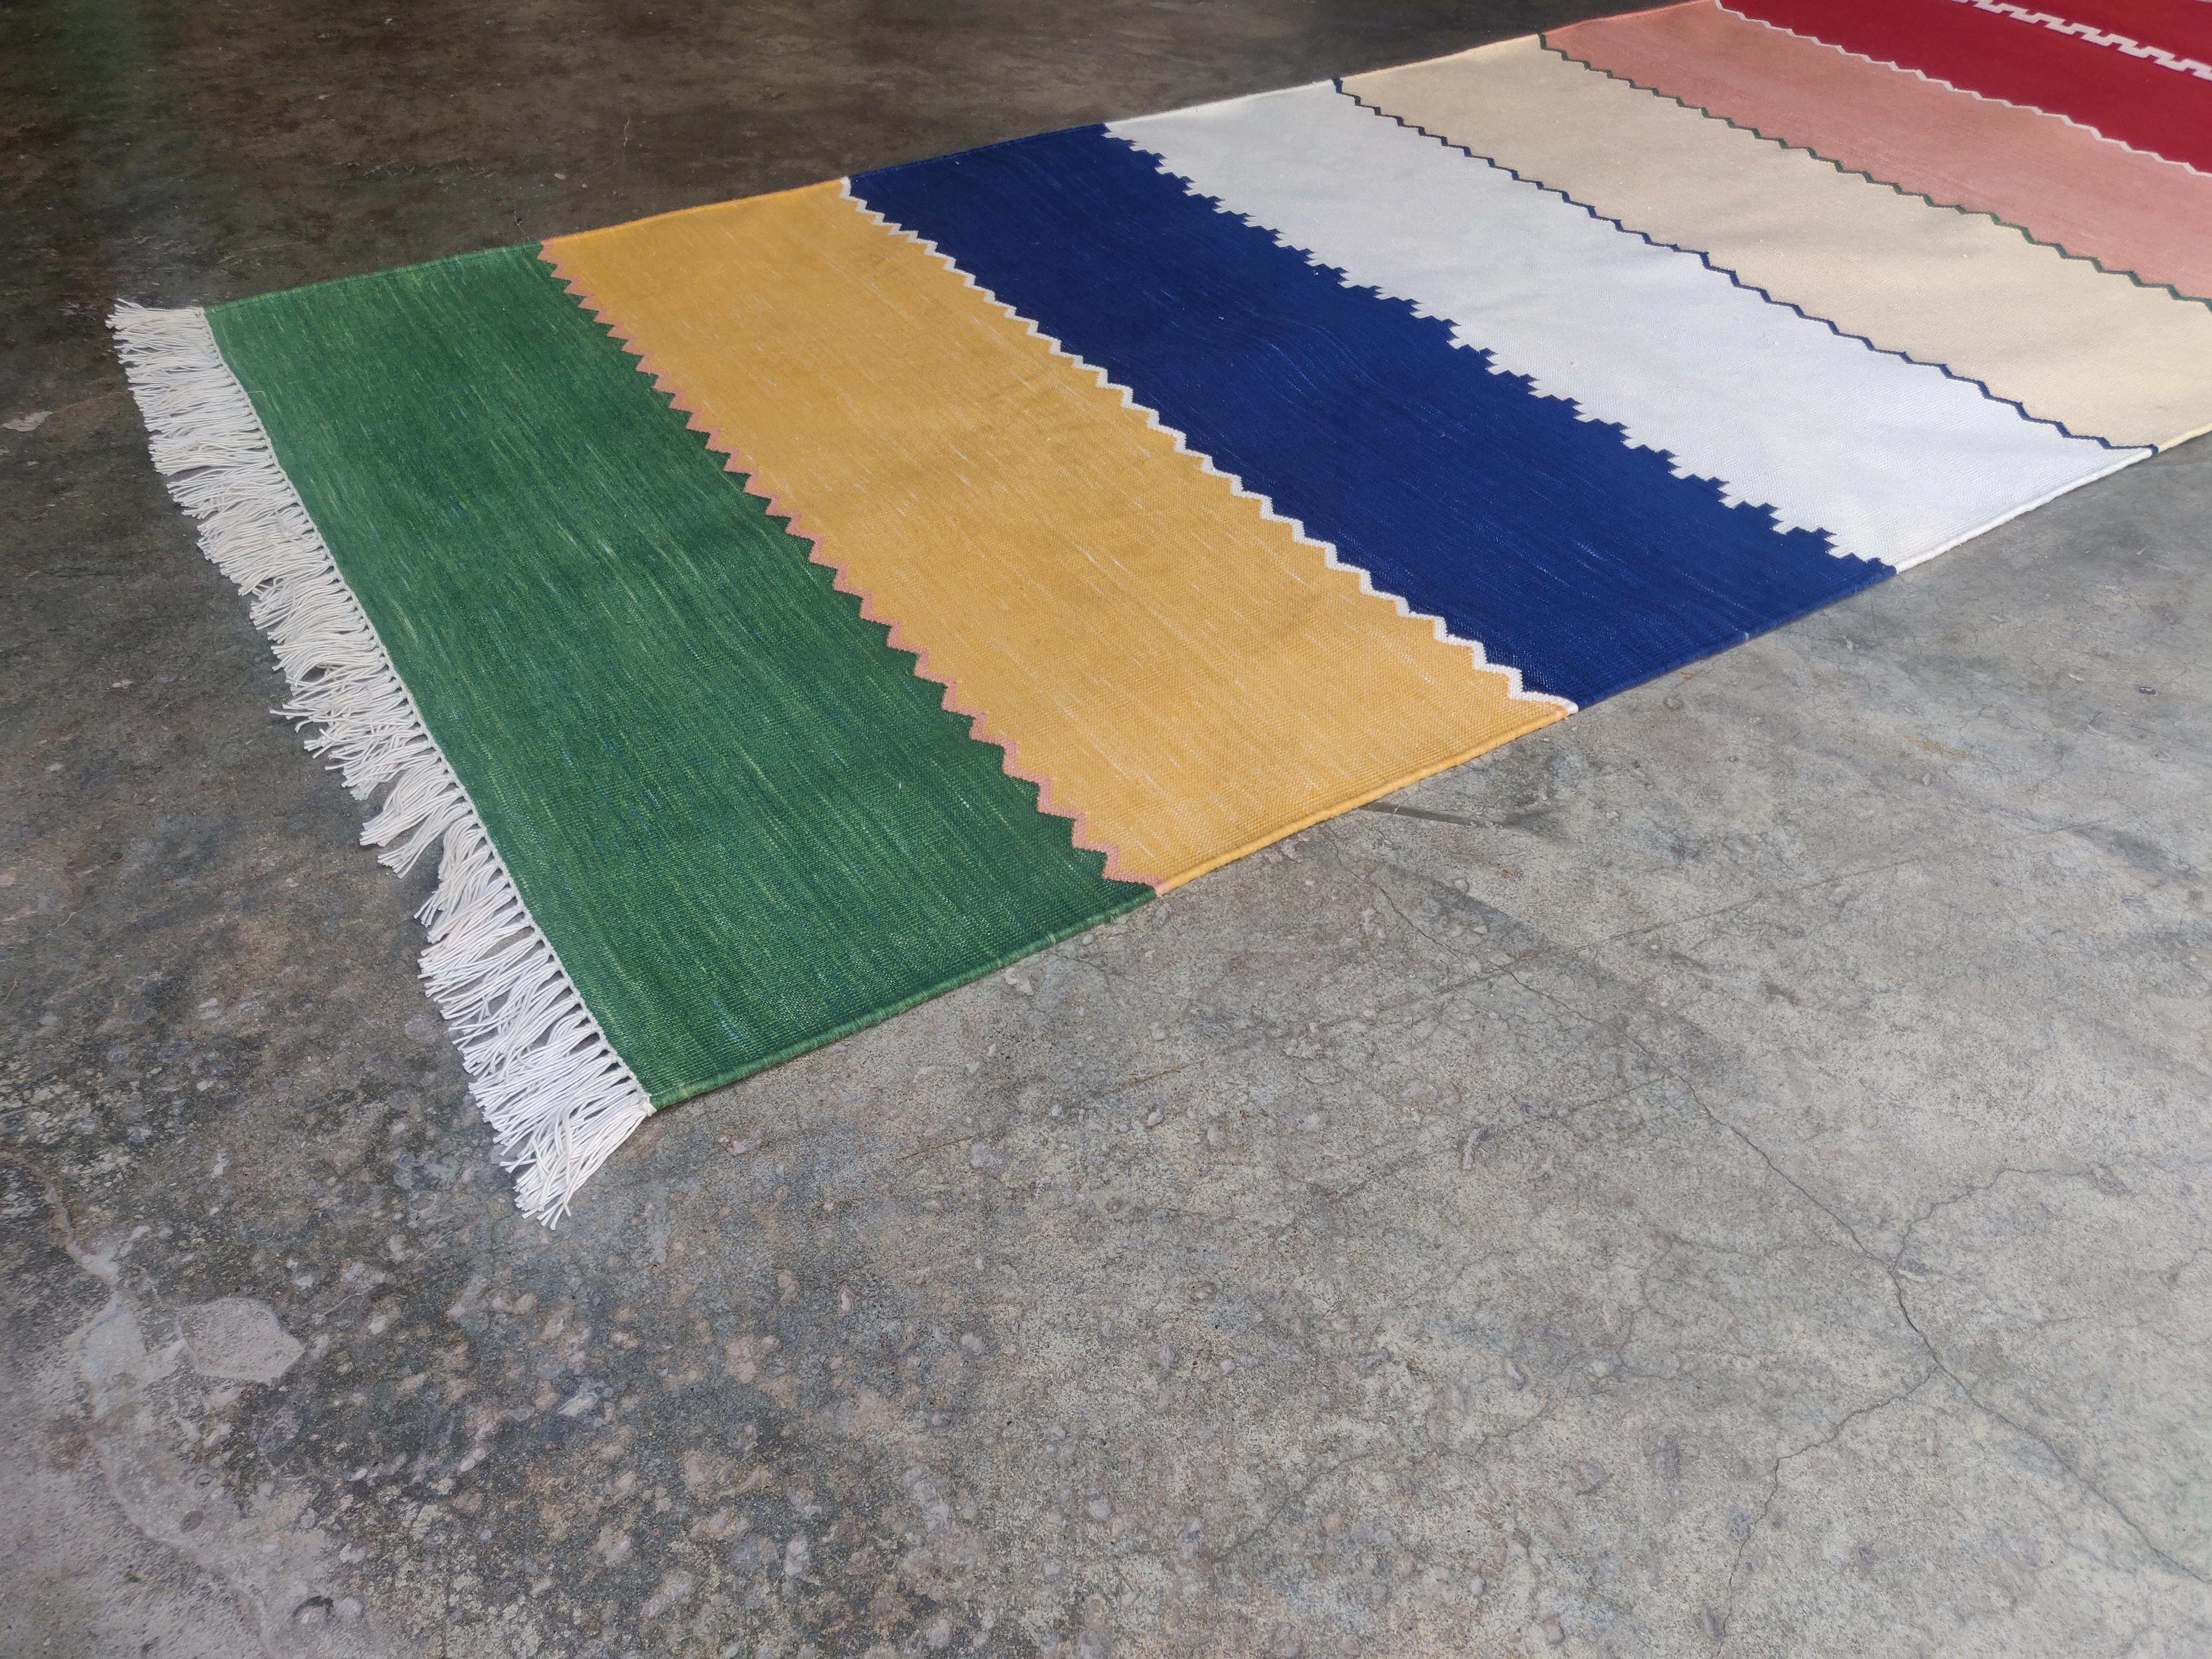 Hand-Woven Handmade Cotton Area Flat Weave Runner, 3x12 Green & Blue Striped Indian Dhurrie For Sale